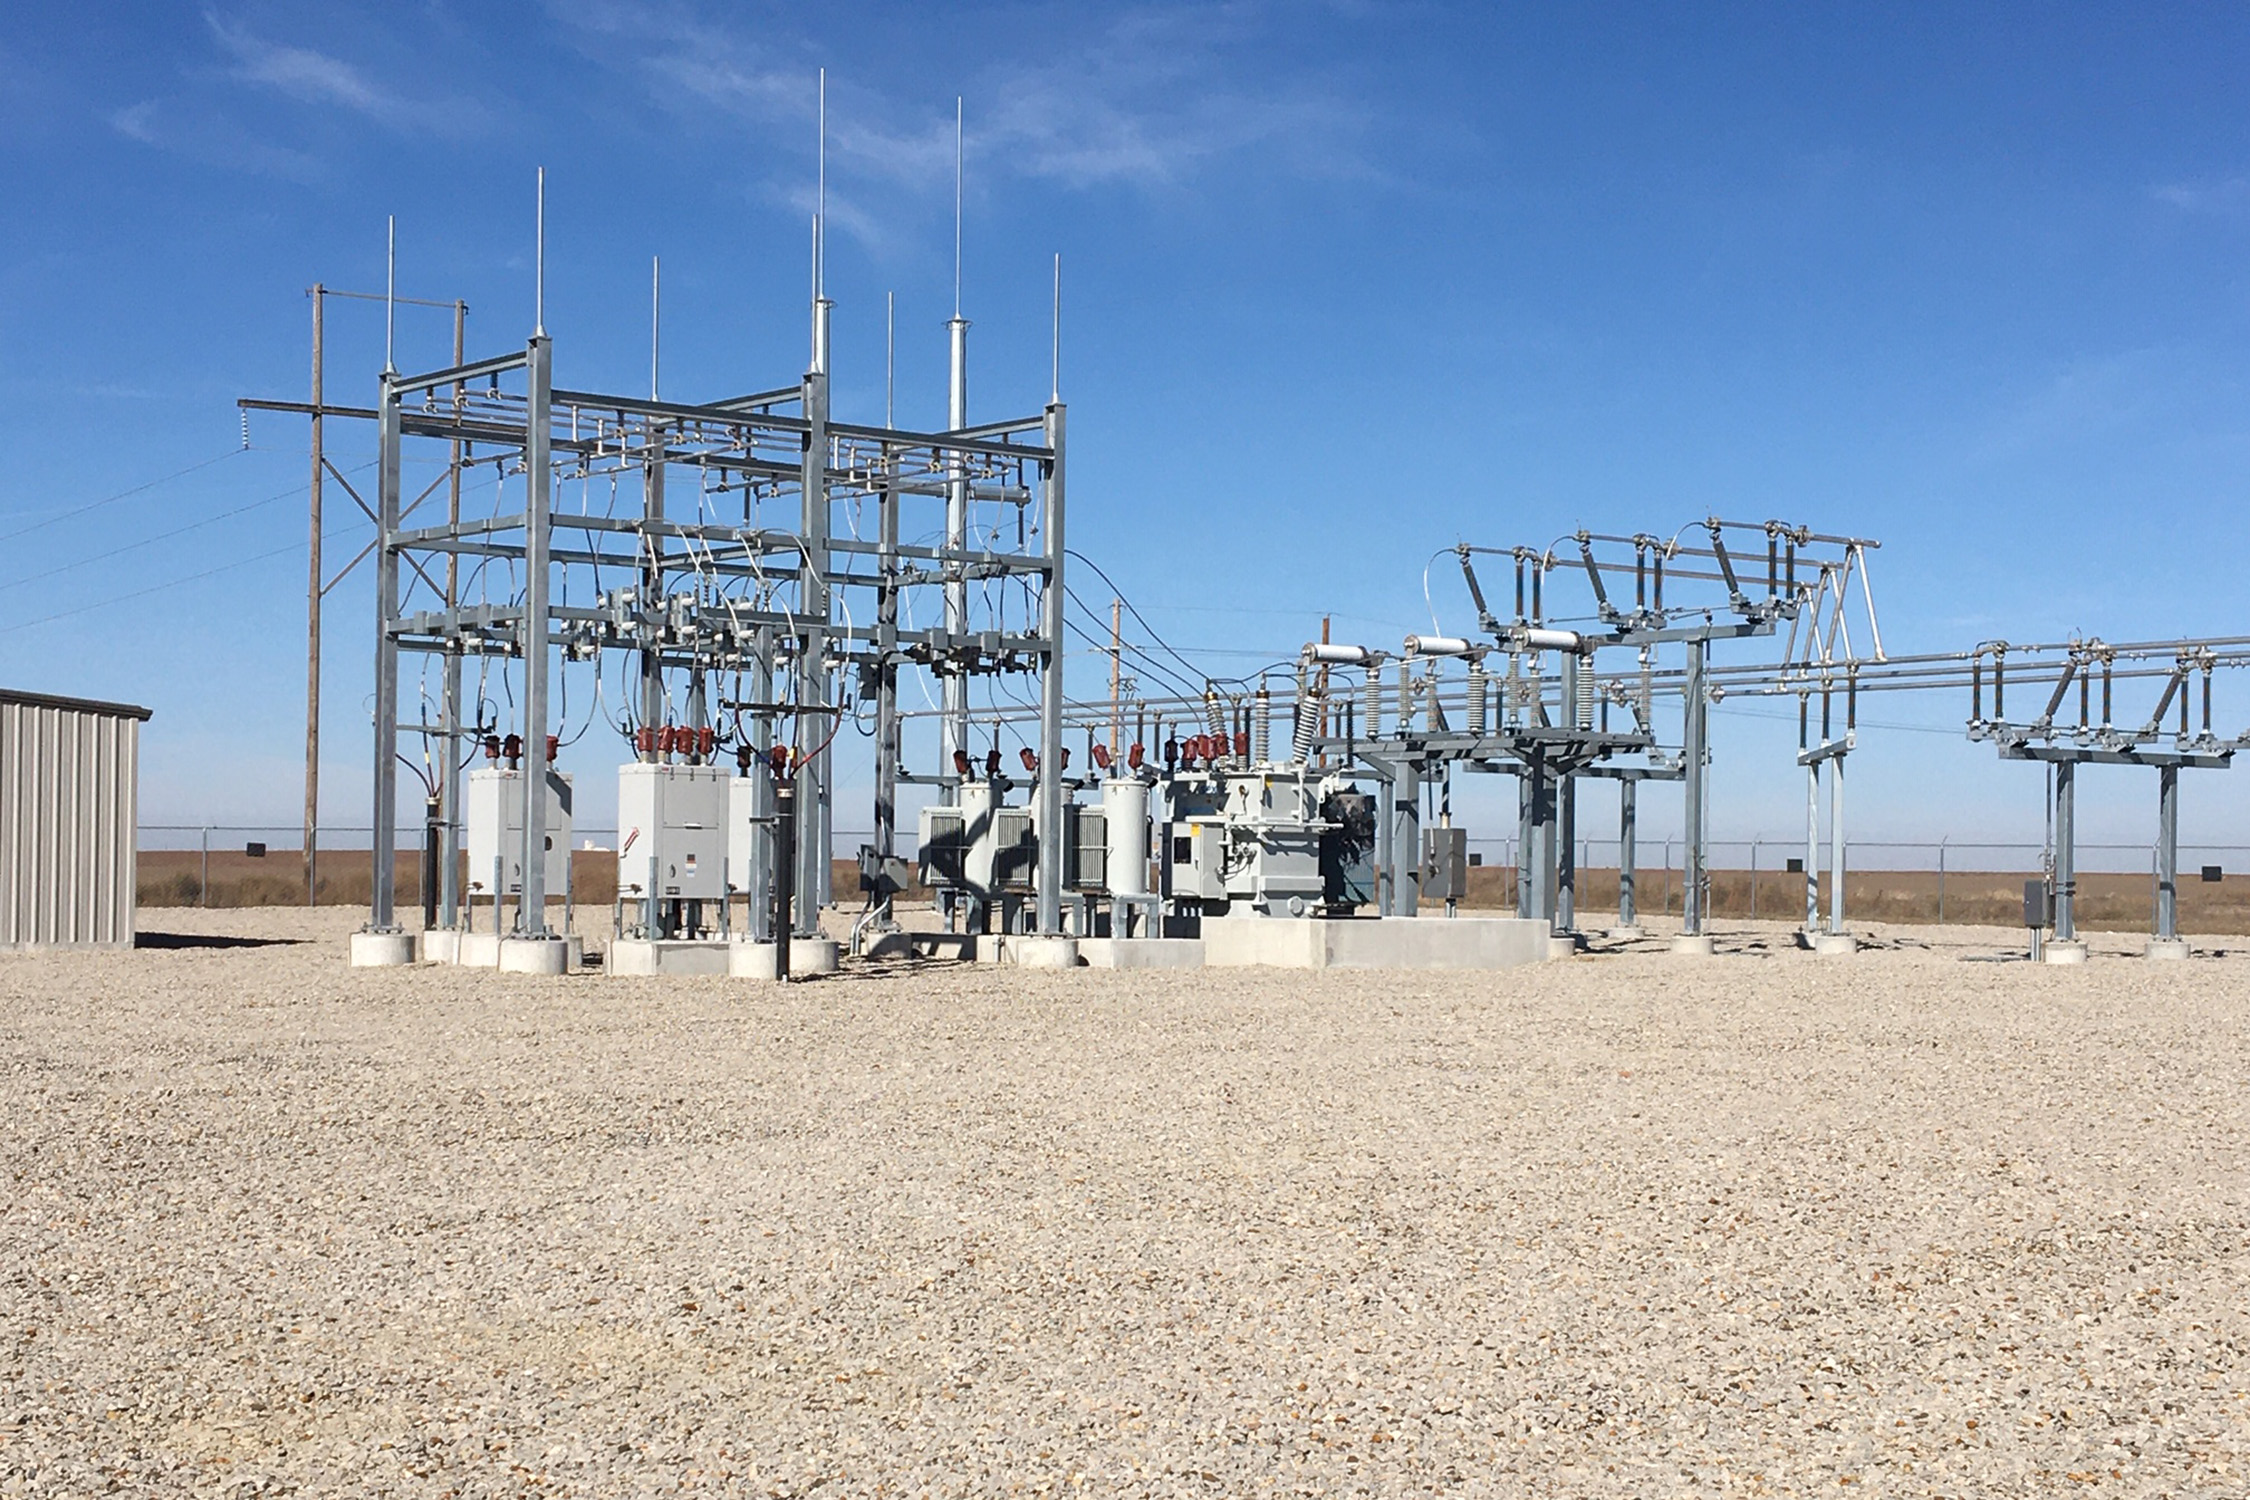 A photo of an electrical substation with steel structures and multiple transformers.